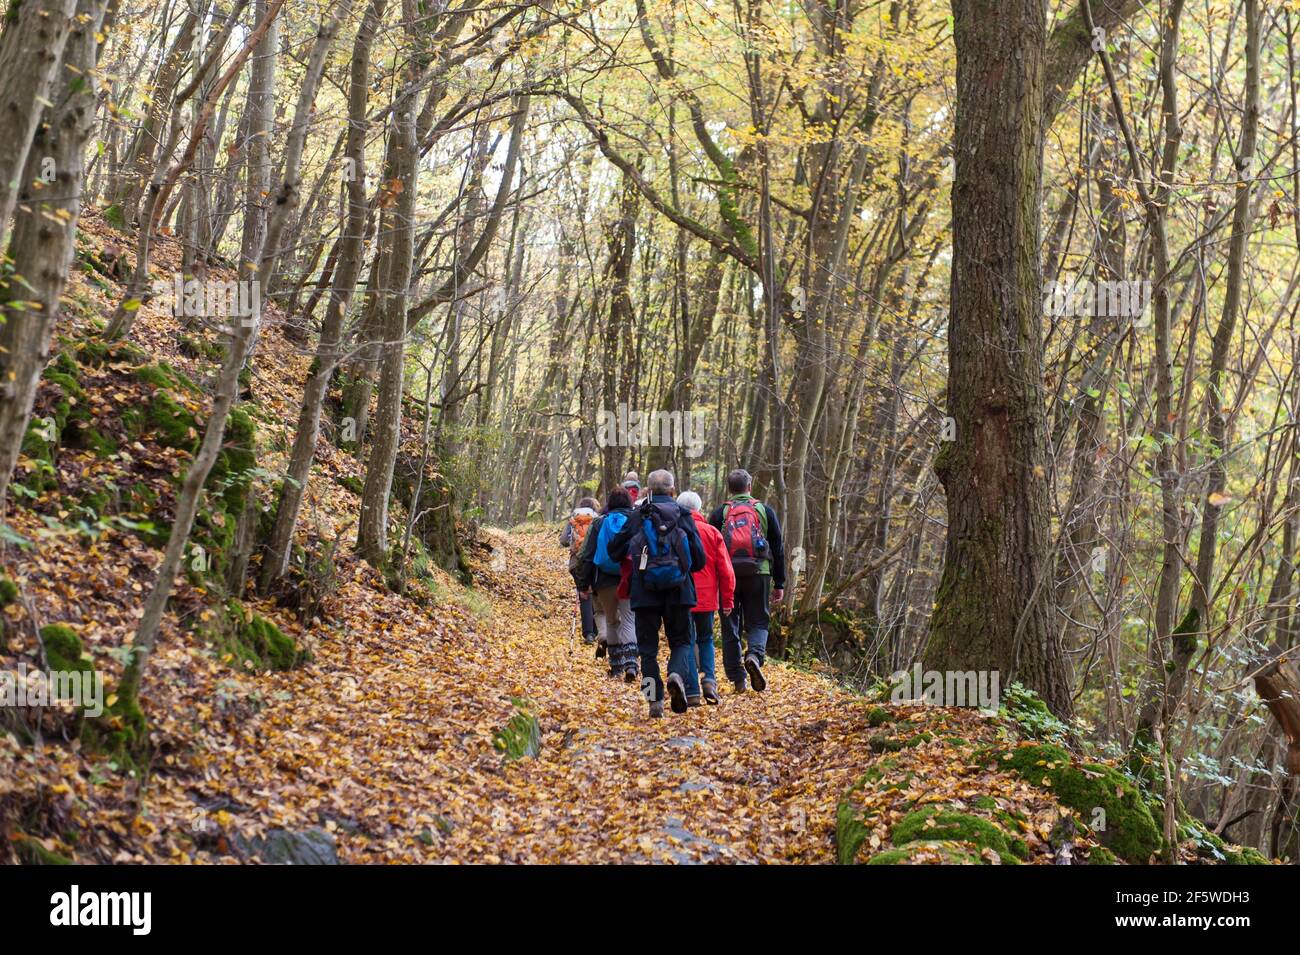 Hiking group, yellow carpet of leaves on hiking trail, foliage colouring, oak-hornbeam forest (Carpinus betulus) in autumn, sessile oak (Quercus Stock Photo